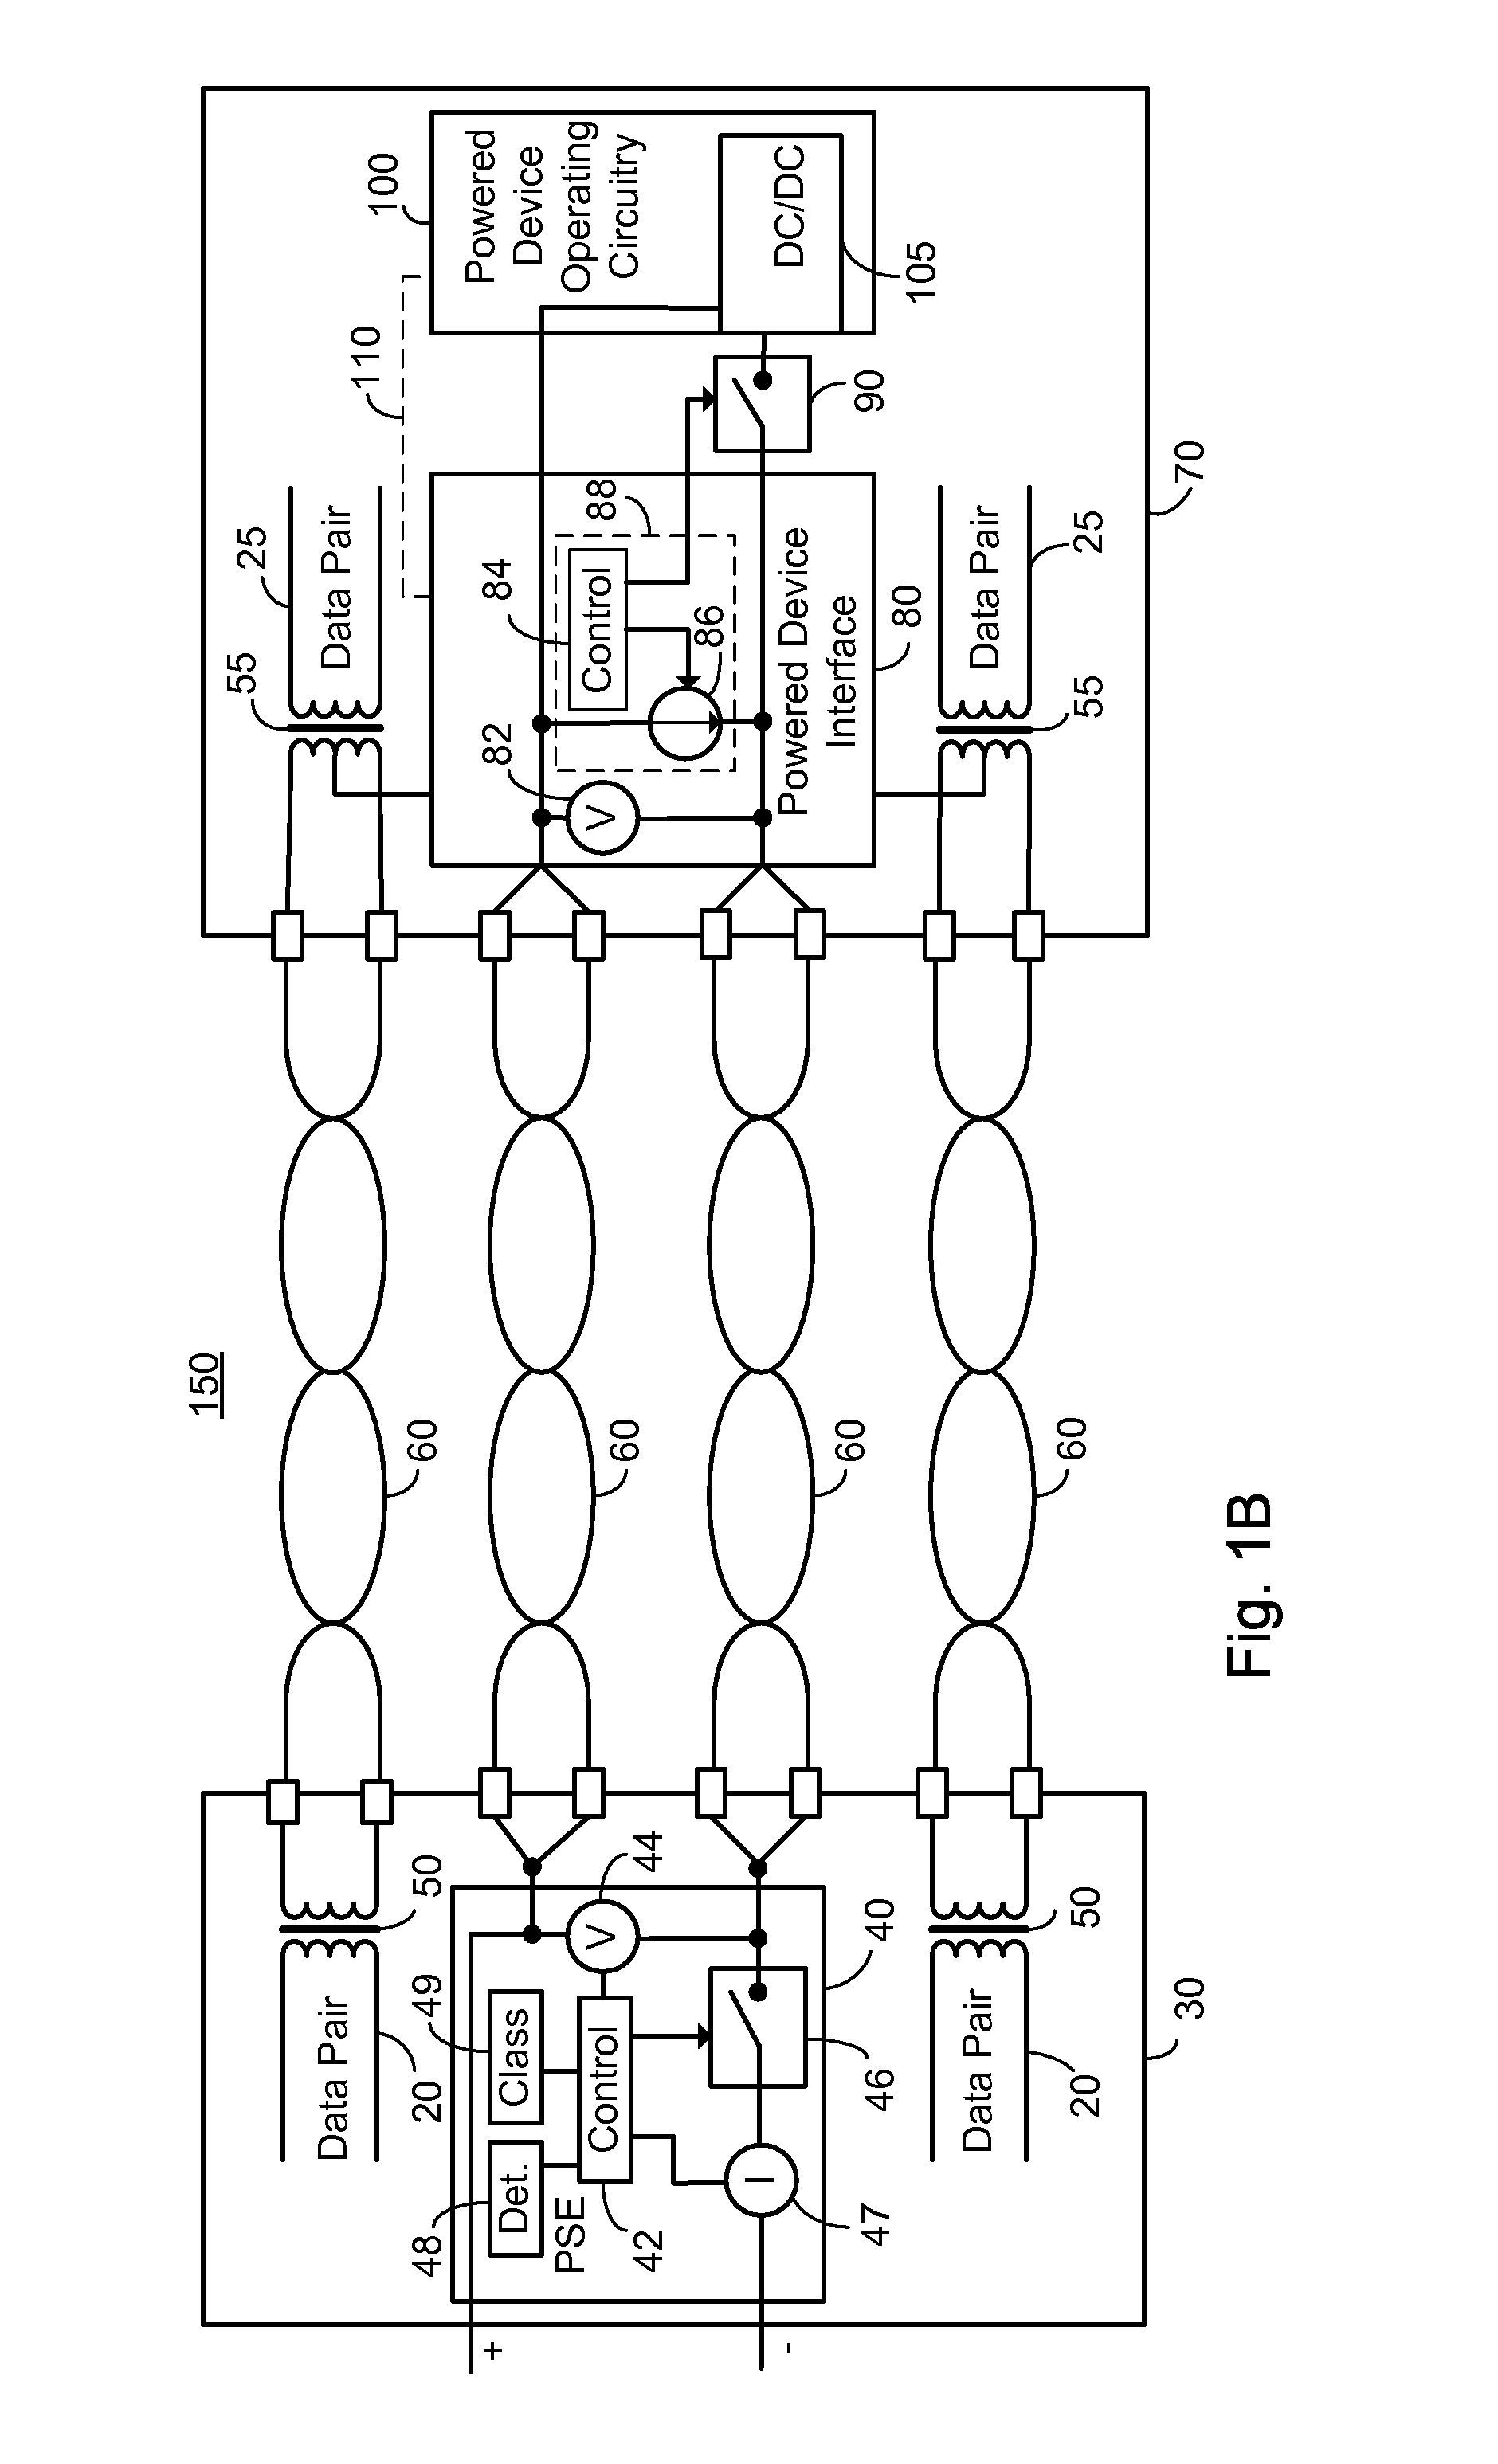 Determination of effective resistance between a power sourcing equipment and a powered device